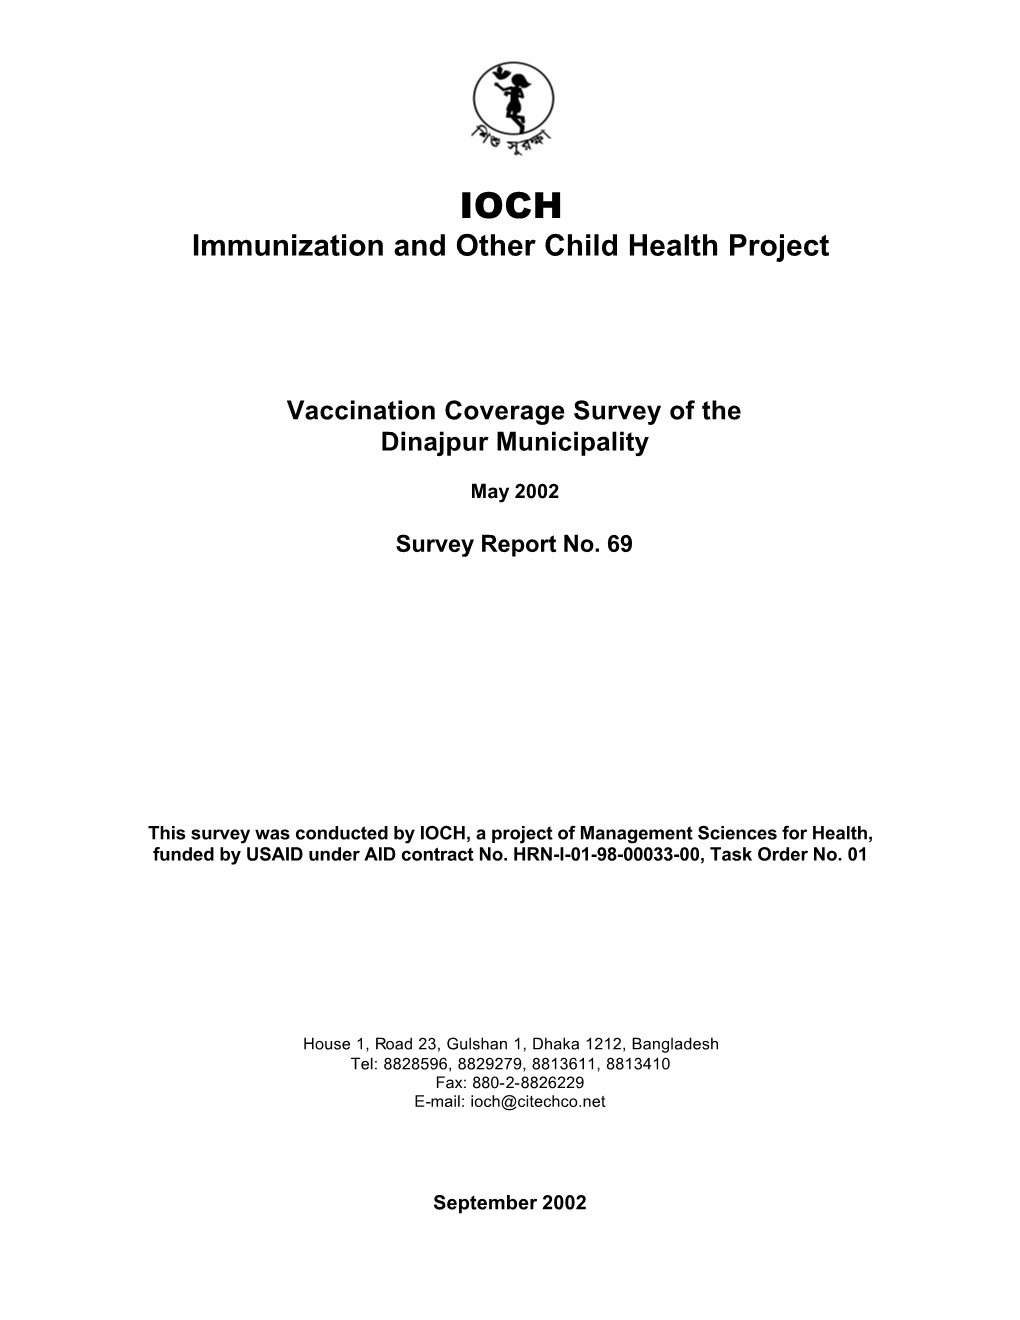 Immunization and Other Child Health Project